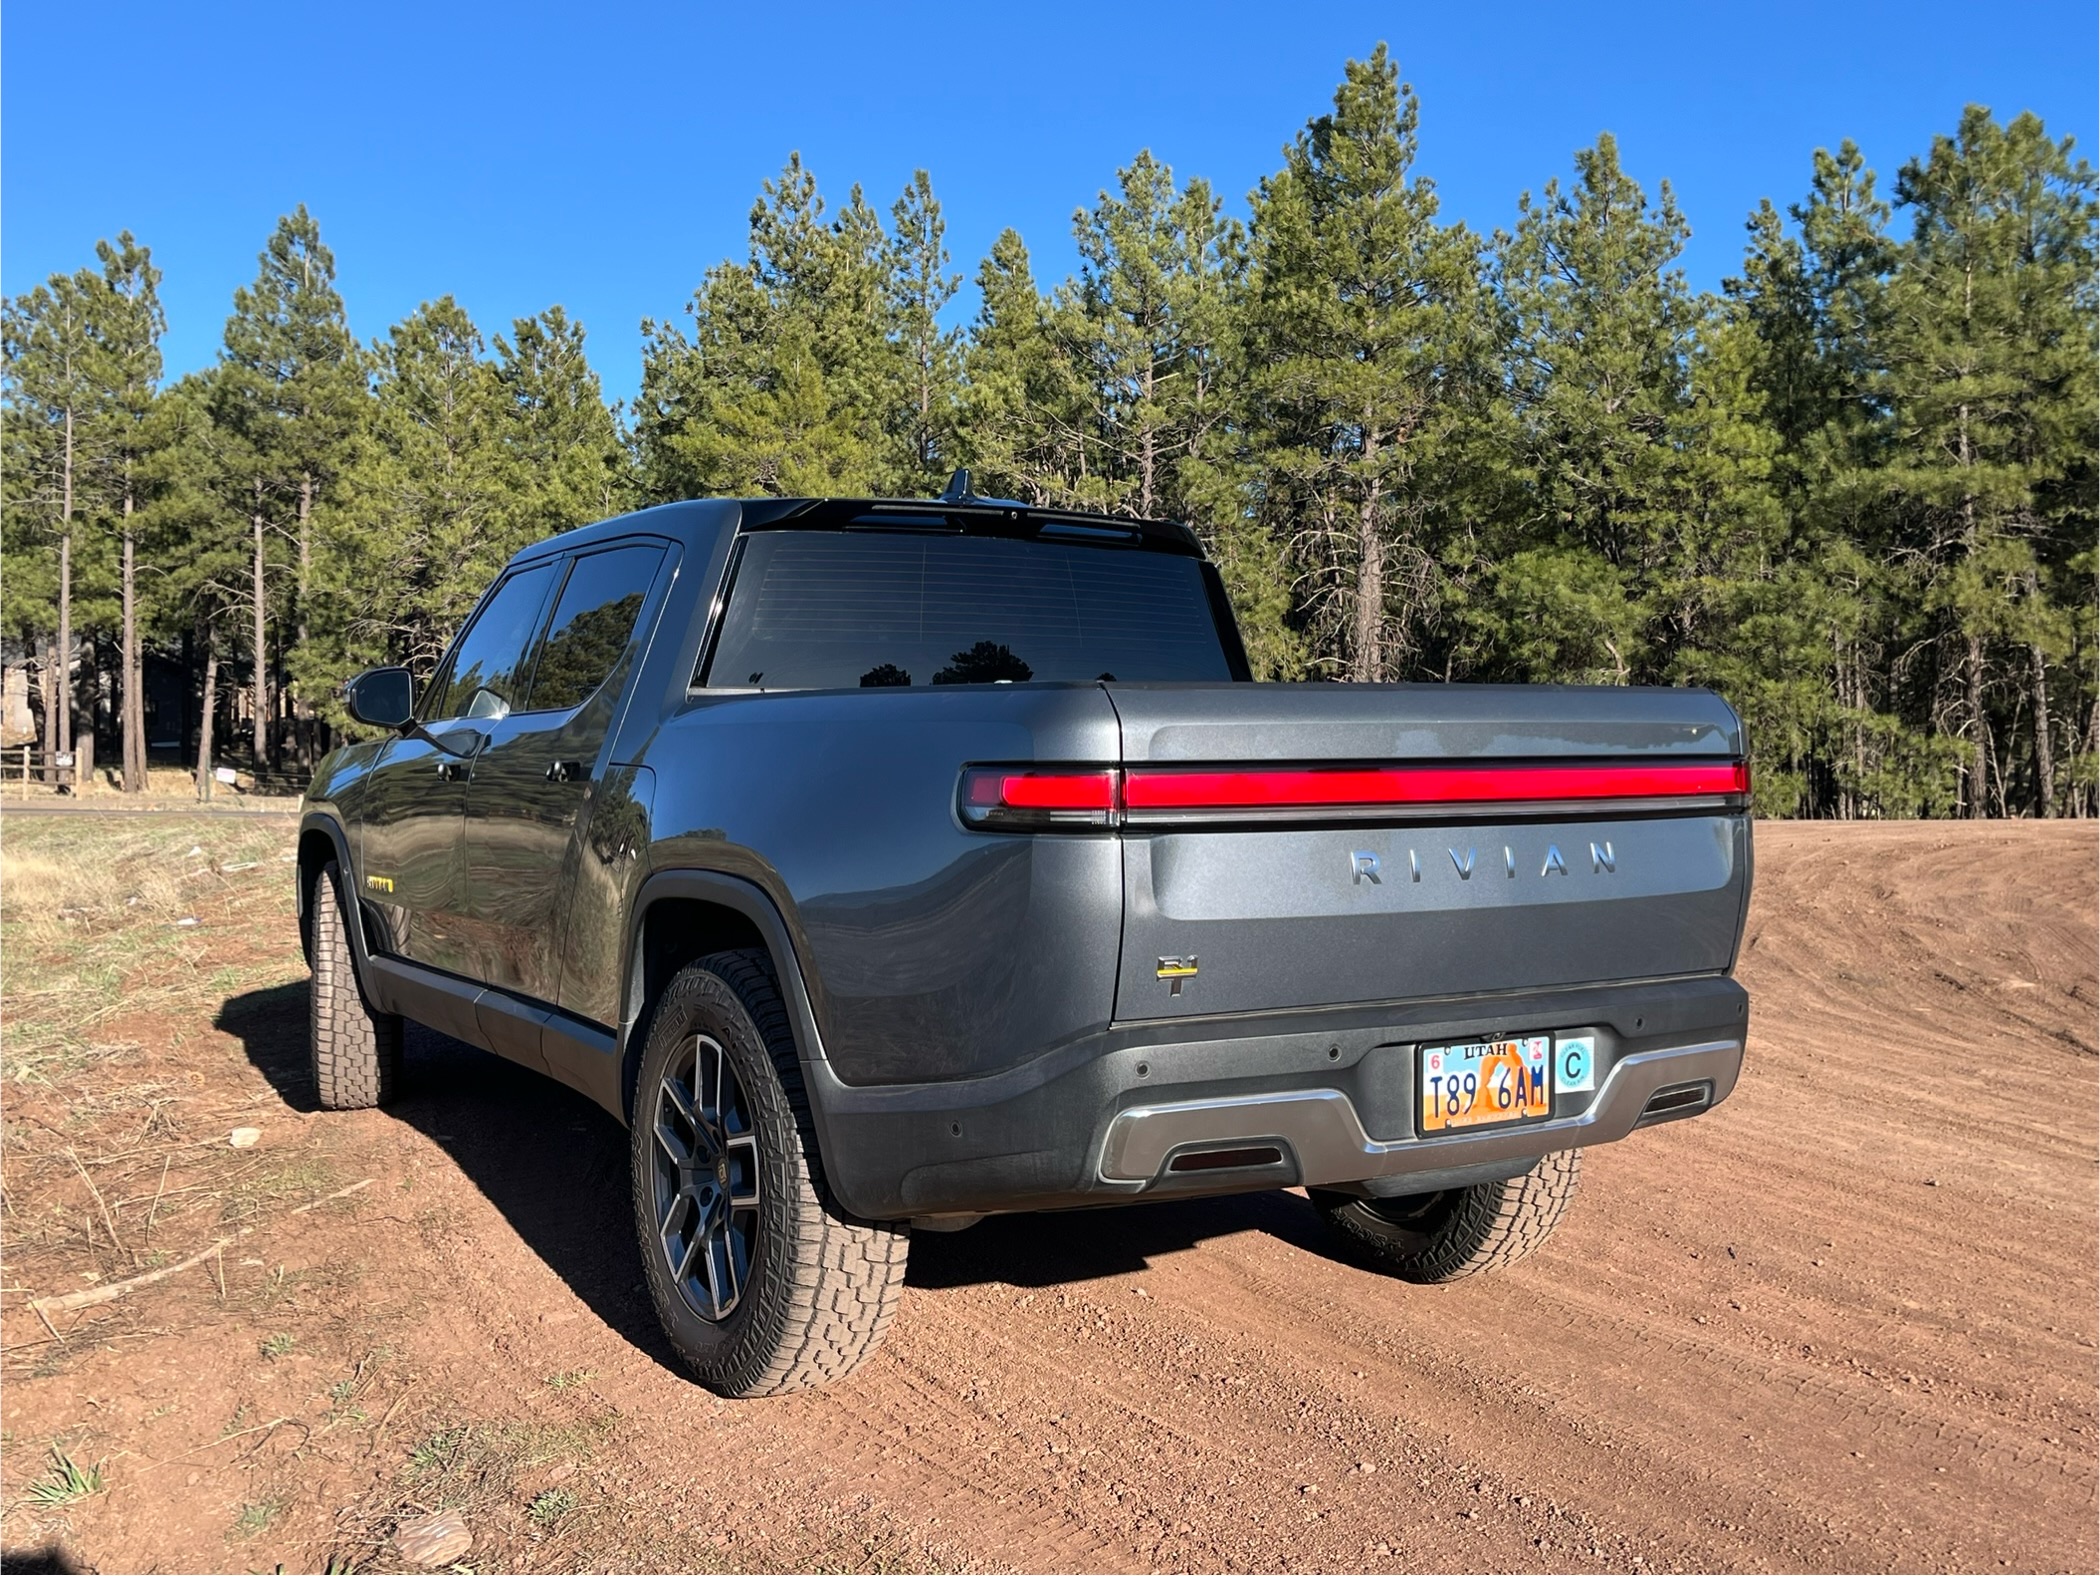 Rivian R1T R1S FOR SALE: 22 R1T LE - El Cap - Quad Motor - Lrg Pack - 20" AT - 39k mi - Off Road Pkg - Lots of Accessories and Aftermarket Upgrades - $60K IMG_6888